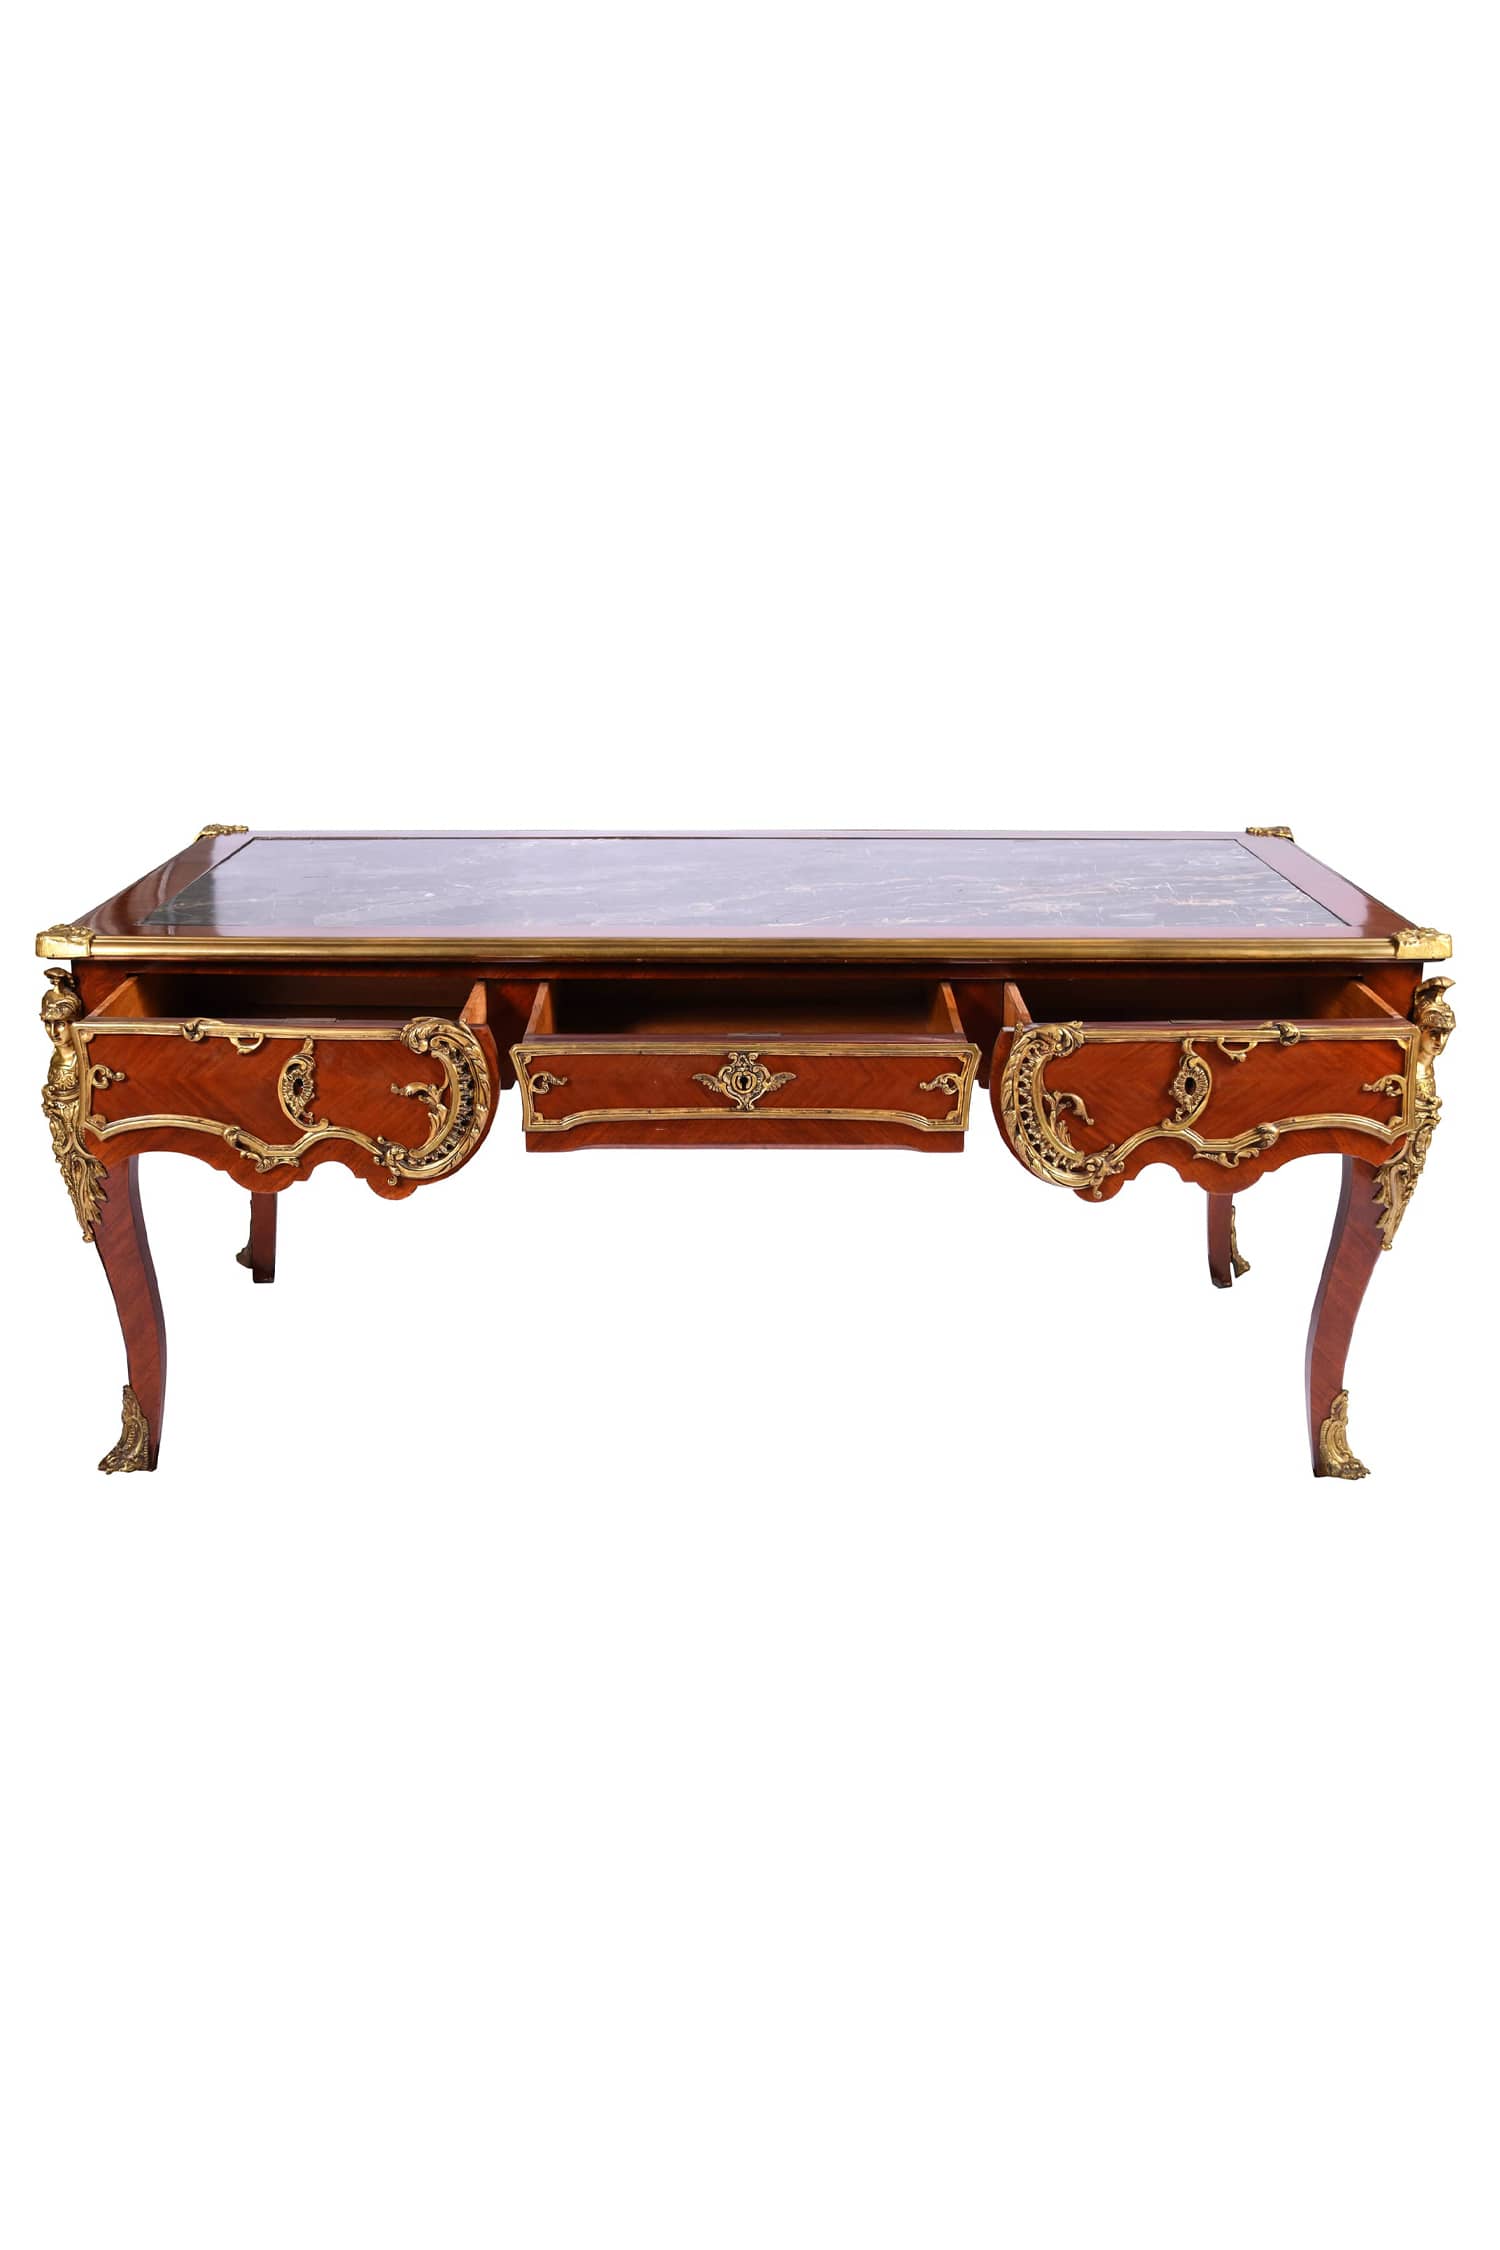 Louis XV-Style Ormolu-Mounted Mahogany and Marble-Top Side Table